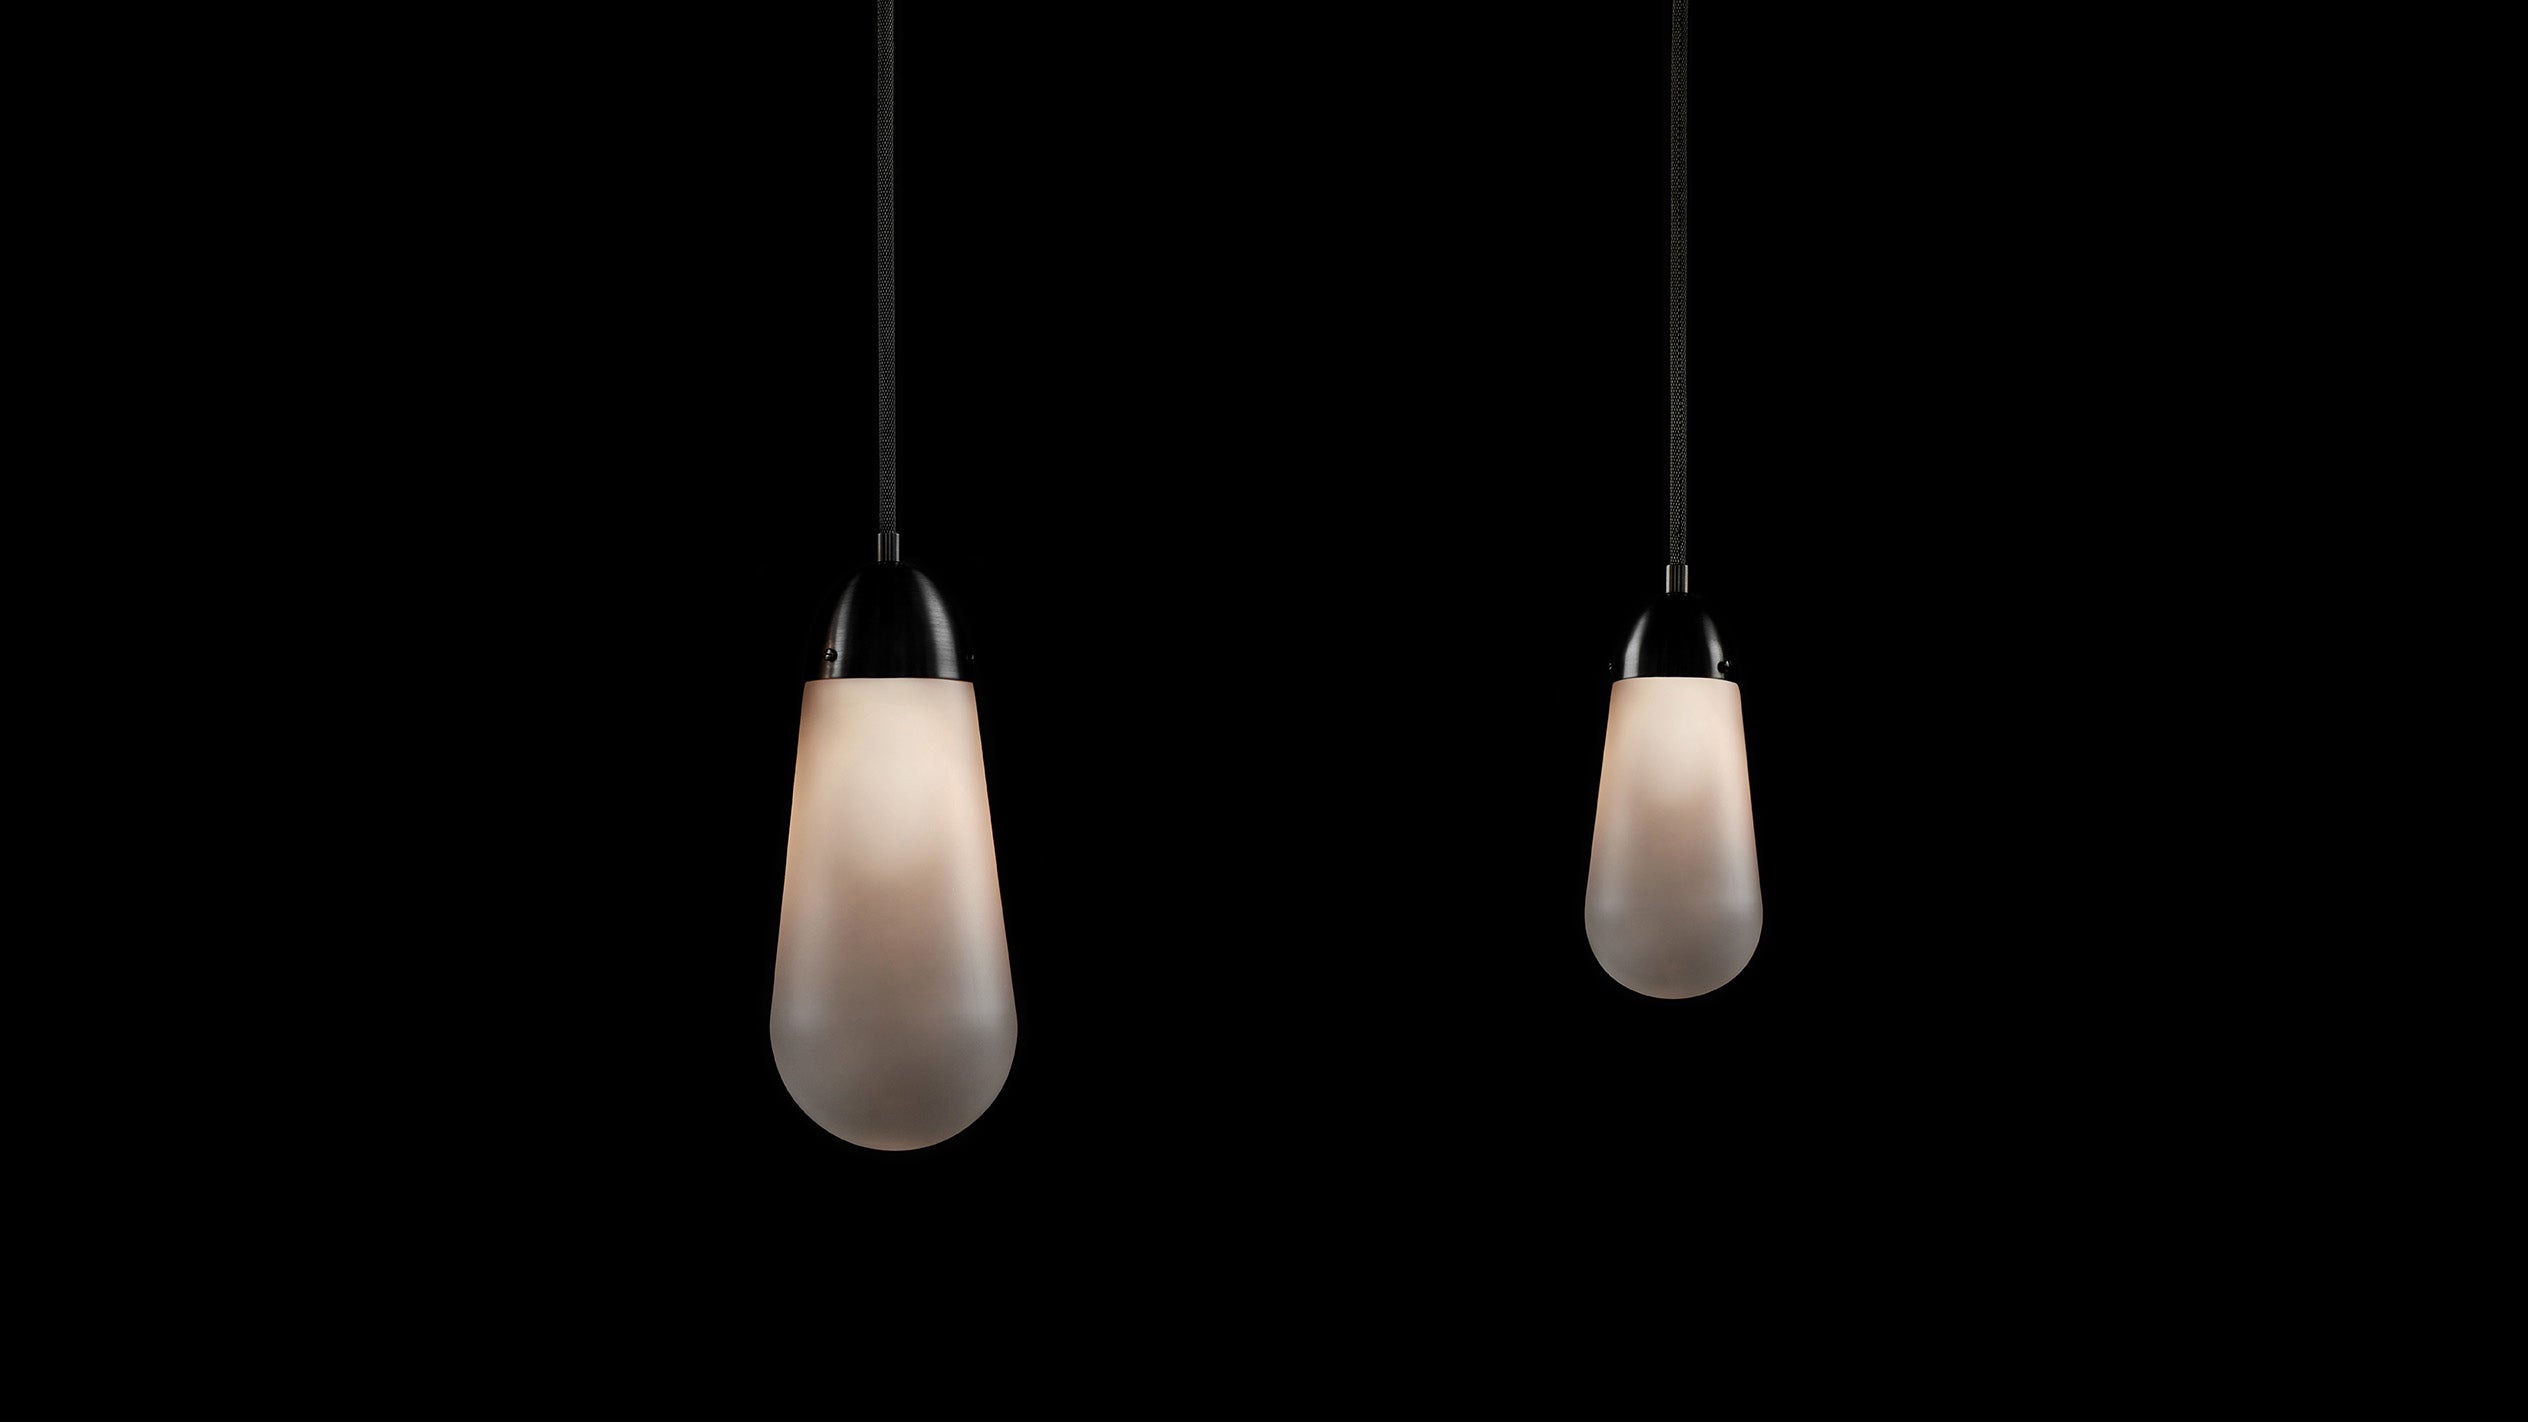 Large LARIAT ceiling pendant hanging next to a small LARIAT ceiling pendant against a black background. 